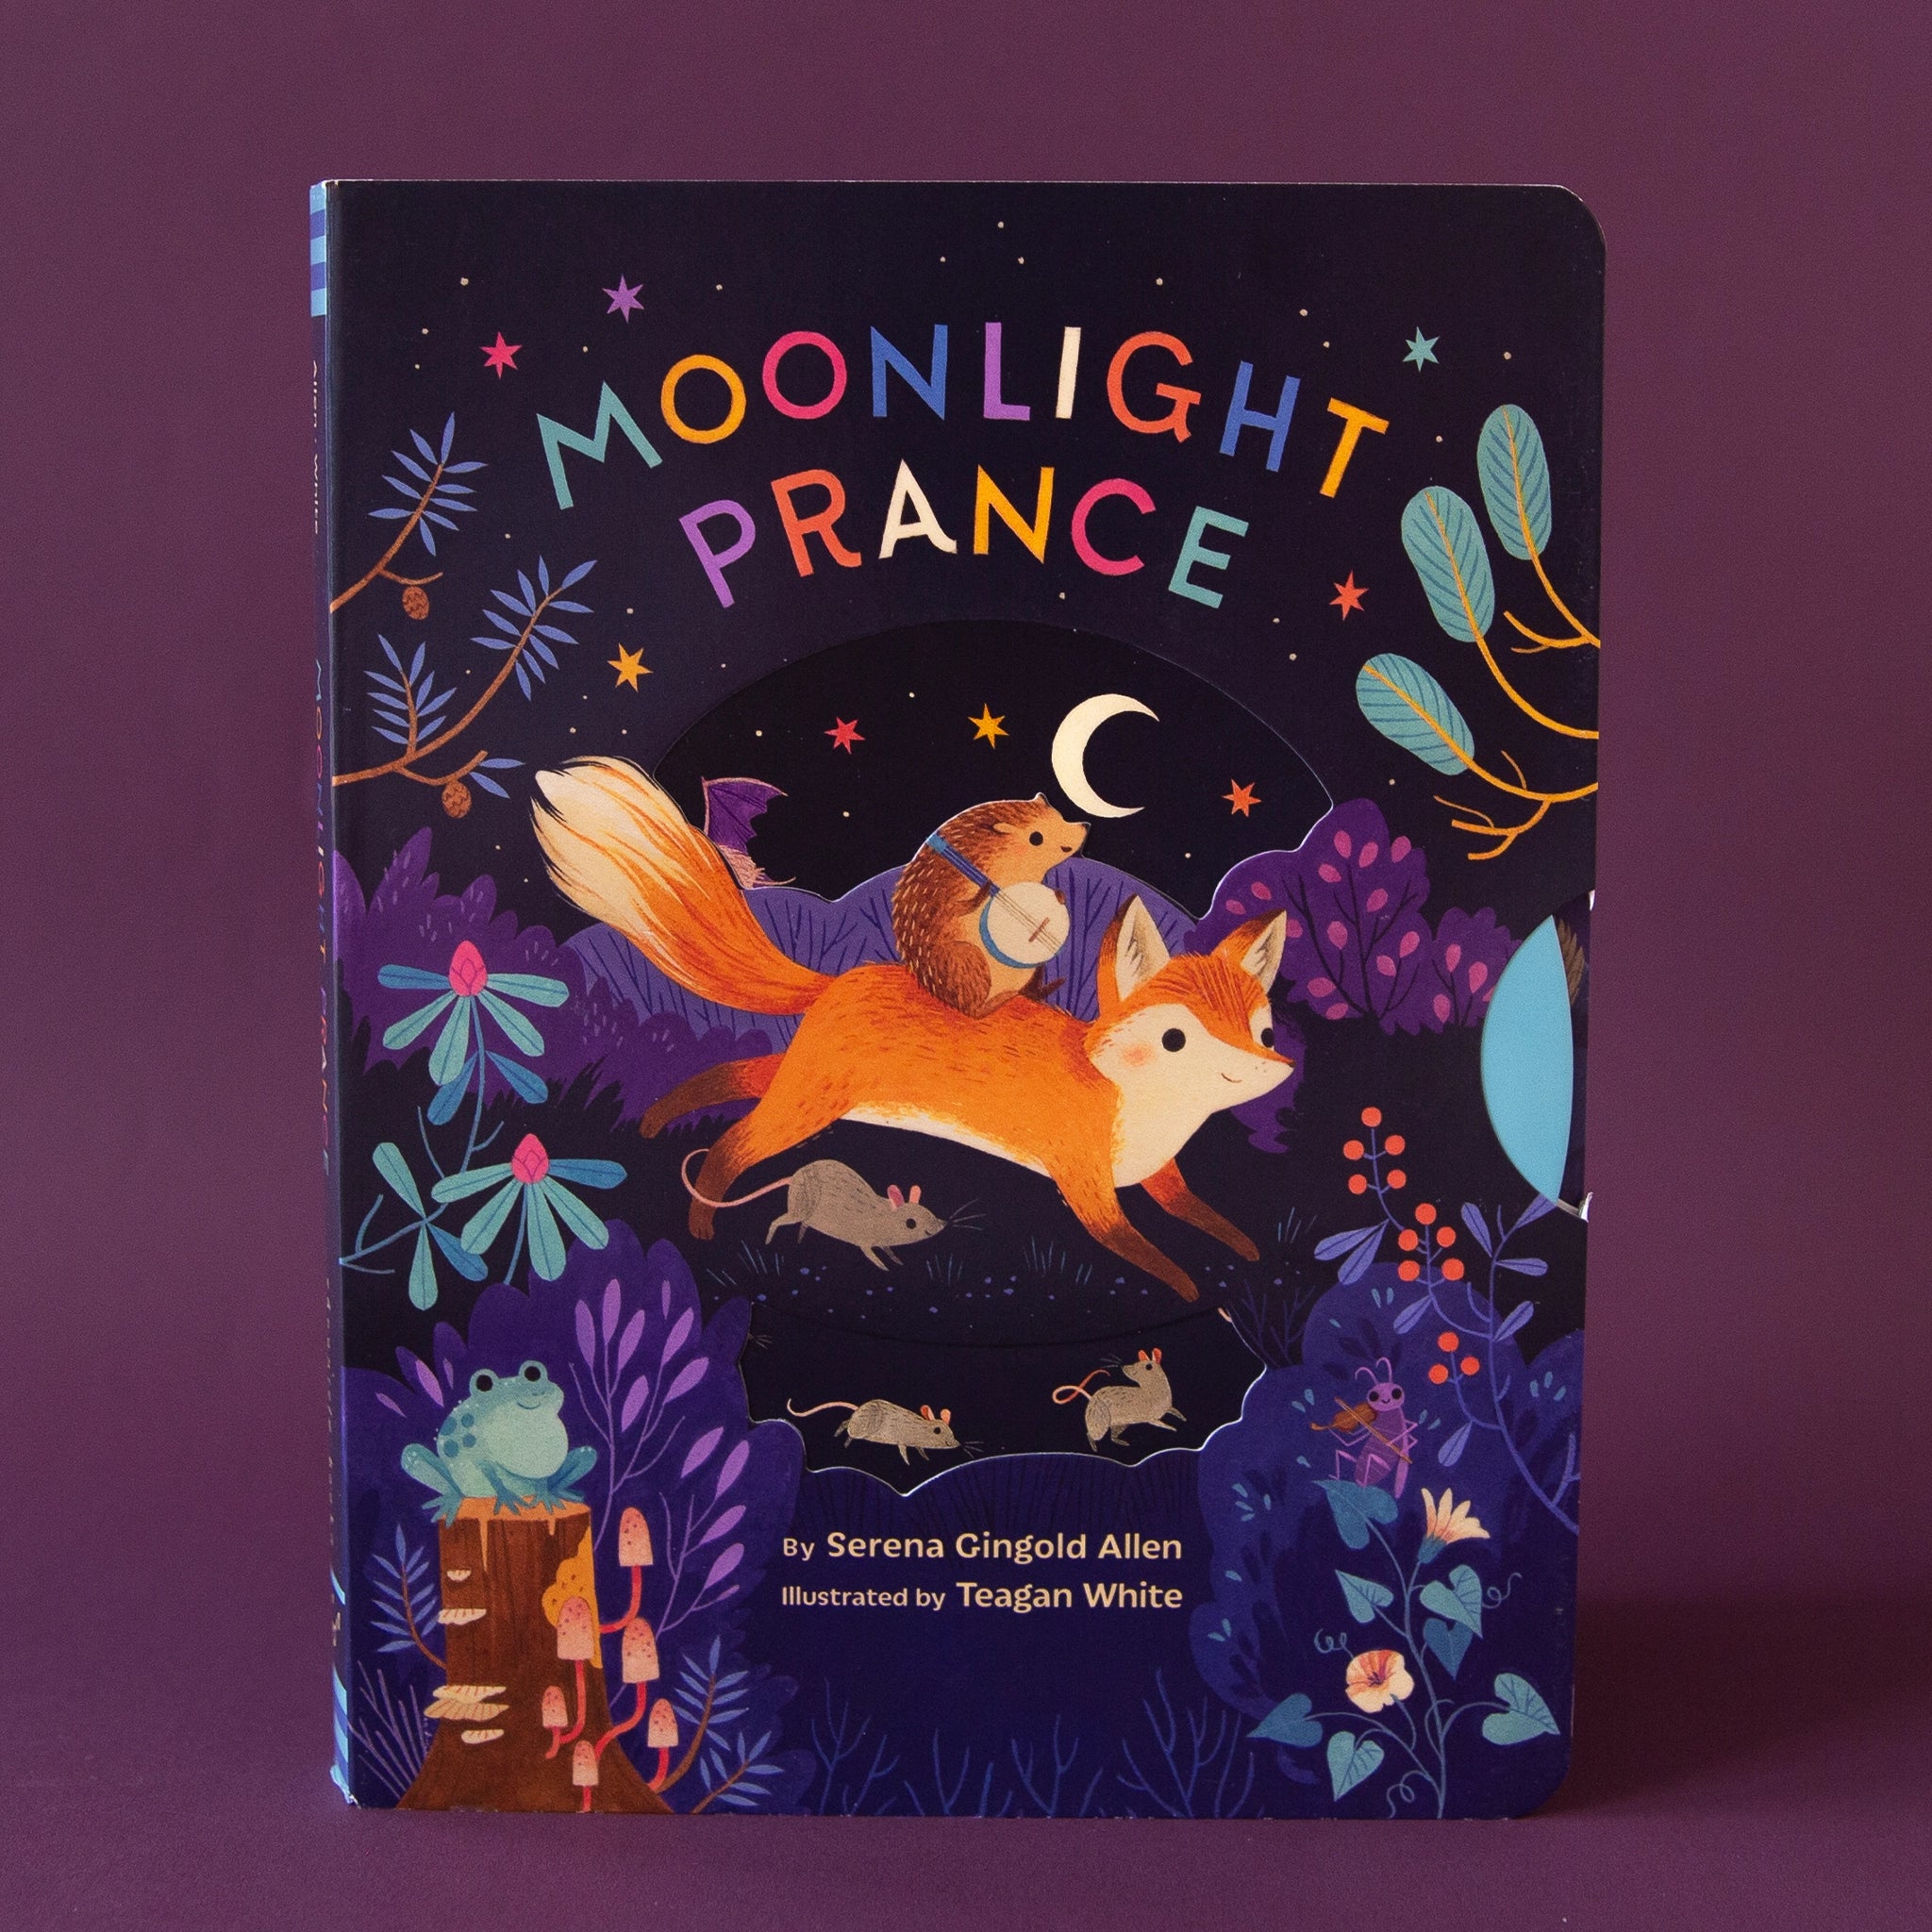 Hard cover children's book titles 'Moonlight Prance' in colorful capital lettering. Below is a woodland scene of various animals dancing around in the moonlight. Animals include a smiling fox, banjo playing hedgehog, mice and more. The background of the cover is solid black and accented with colorful star detailing.